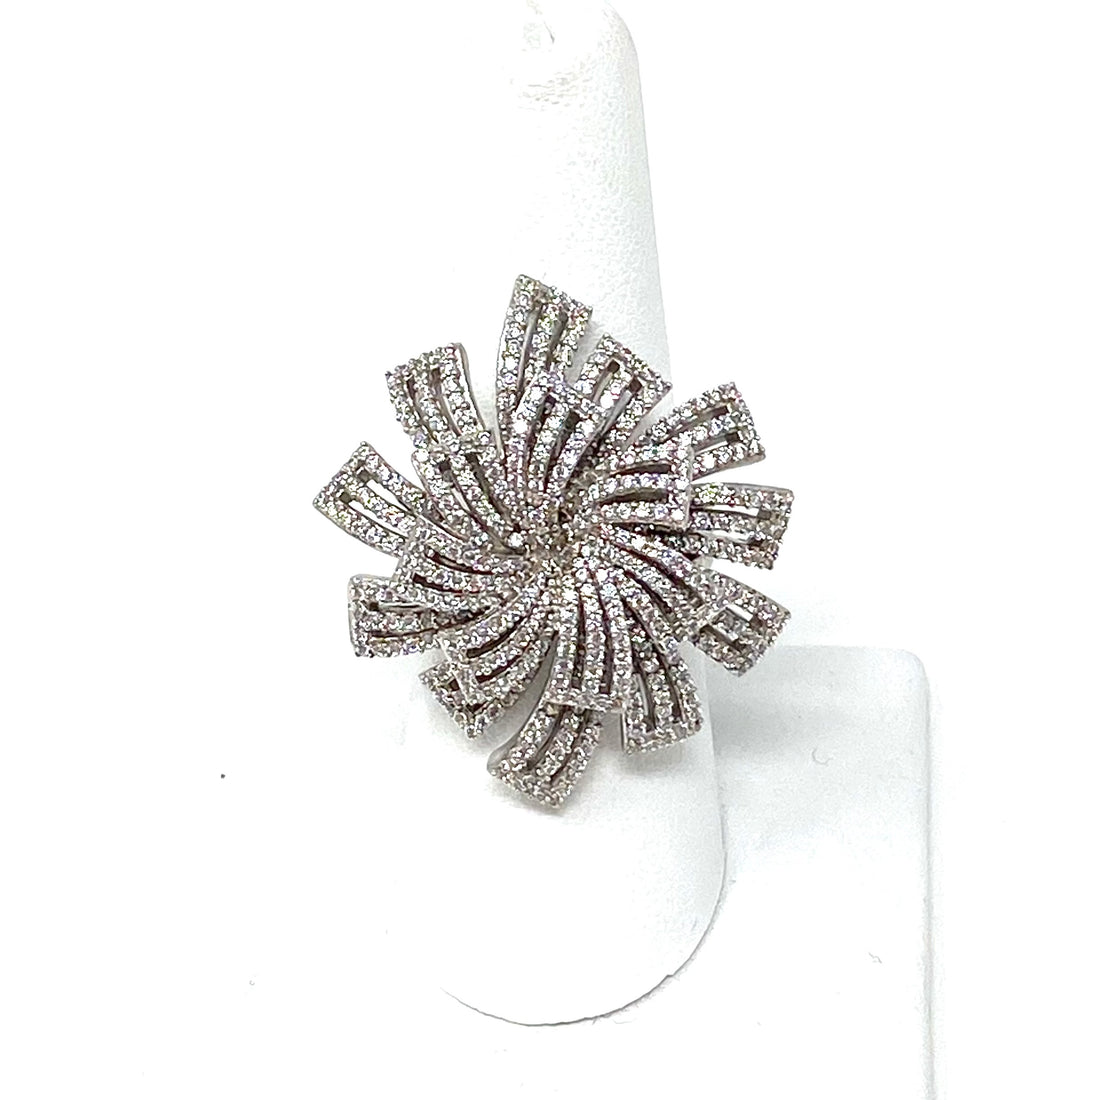 Maria Pave Ring in Silver